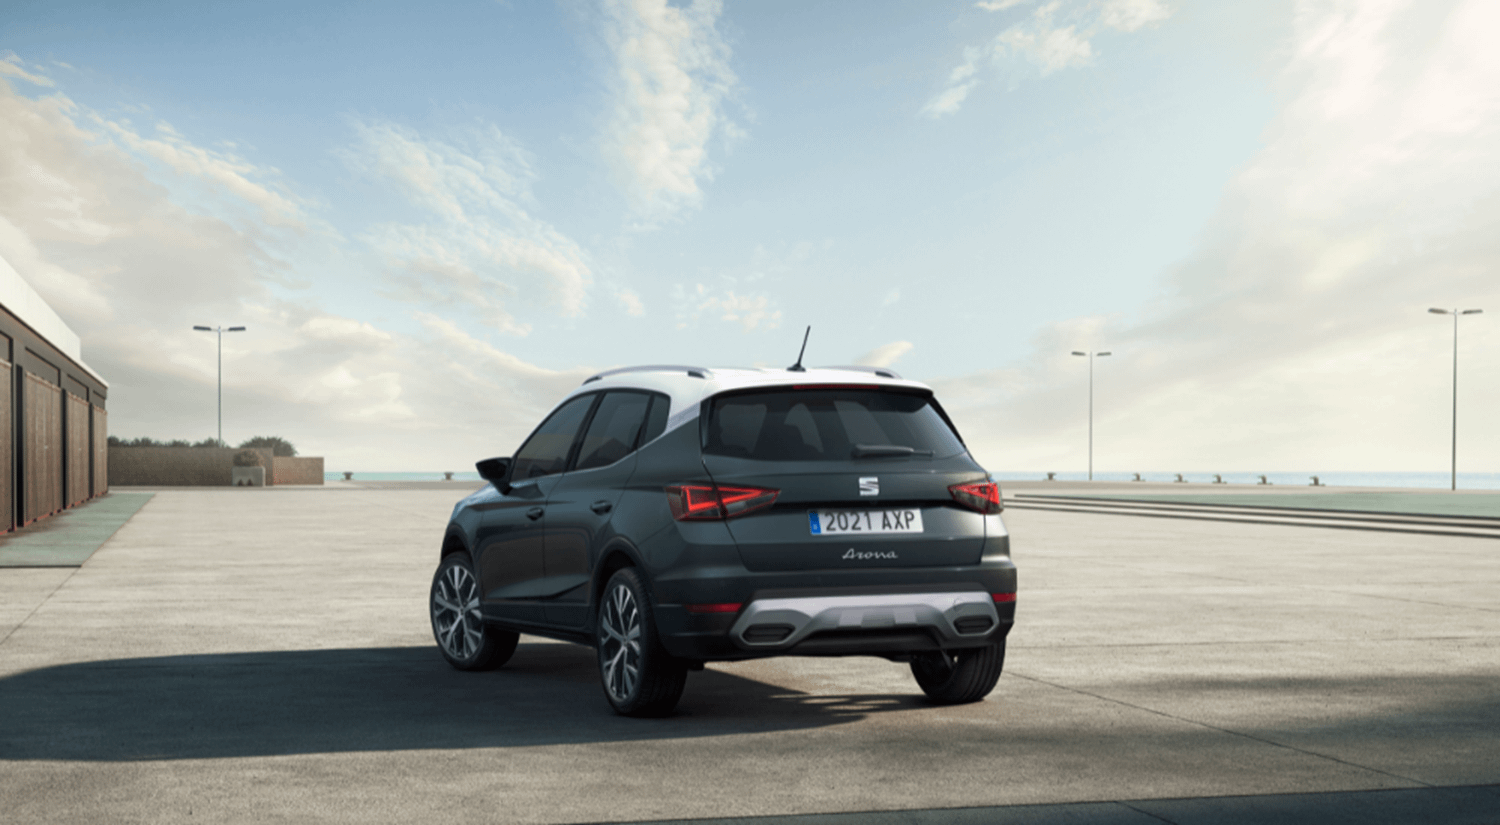 New SEAT Arona 2021 Rear Side View